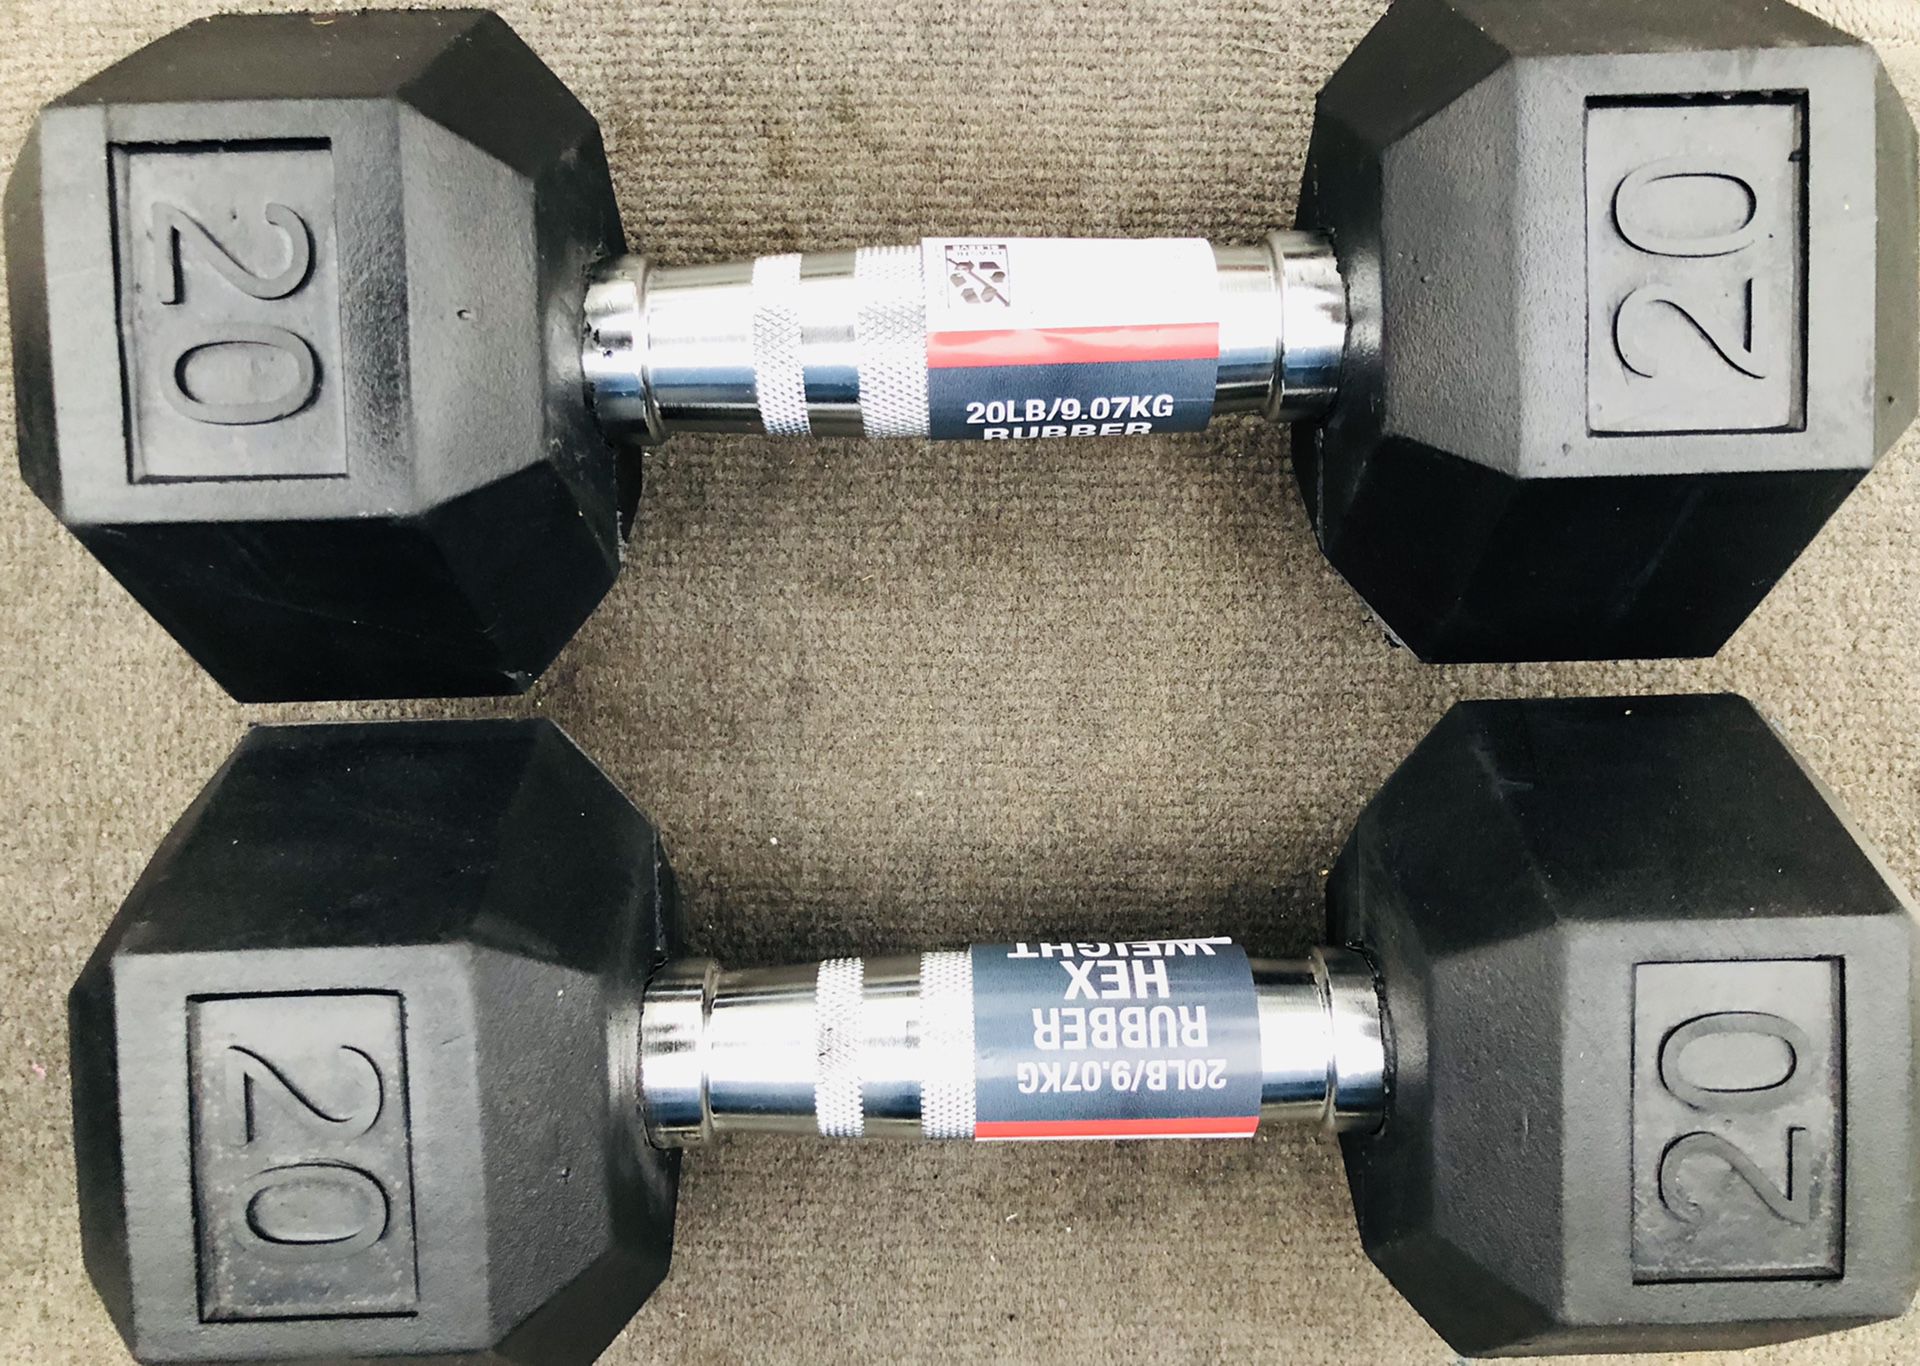 Two new 20 Pound Weights (dumbbells)